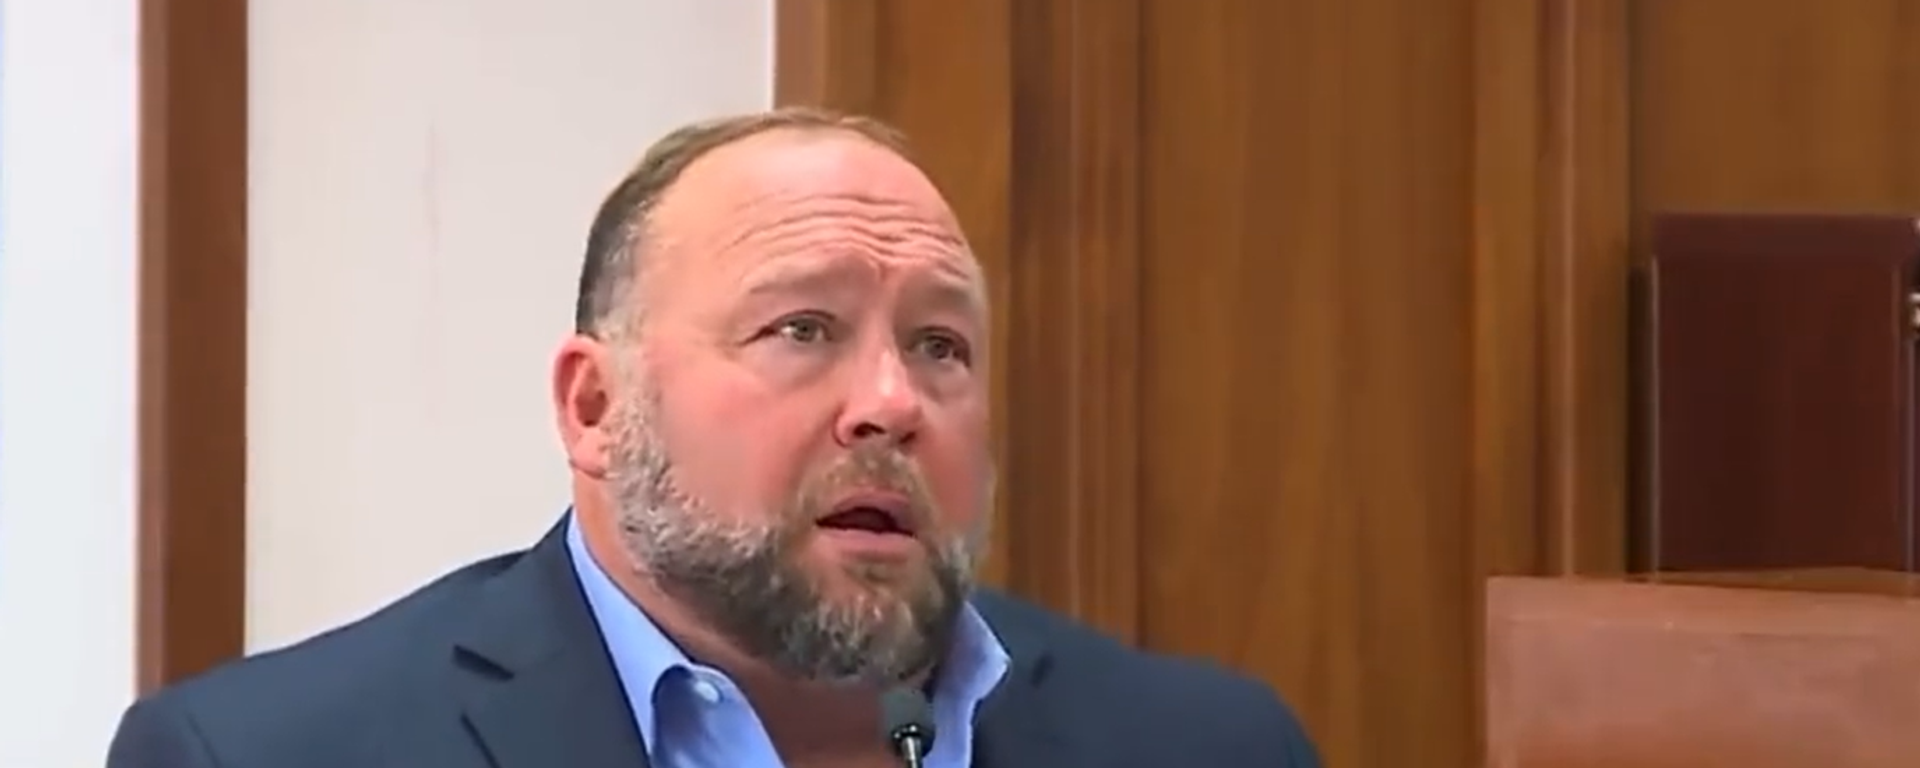 Infowars founder Alex Jones in a Texas court facing defamation charges by a family of a victim of the 2012 Sandy Hook shooting - Sputnik International, 1920, 03.08.2022